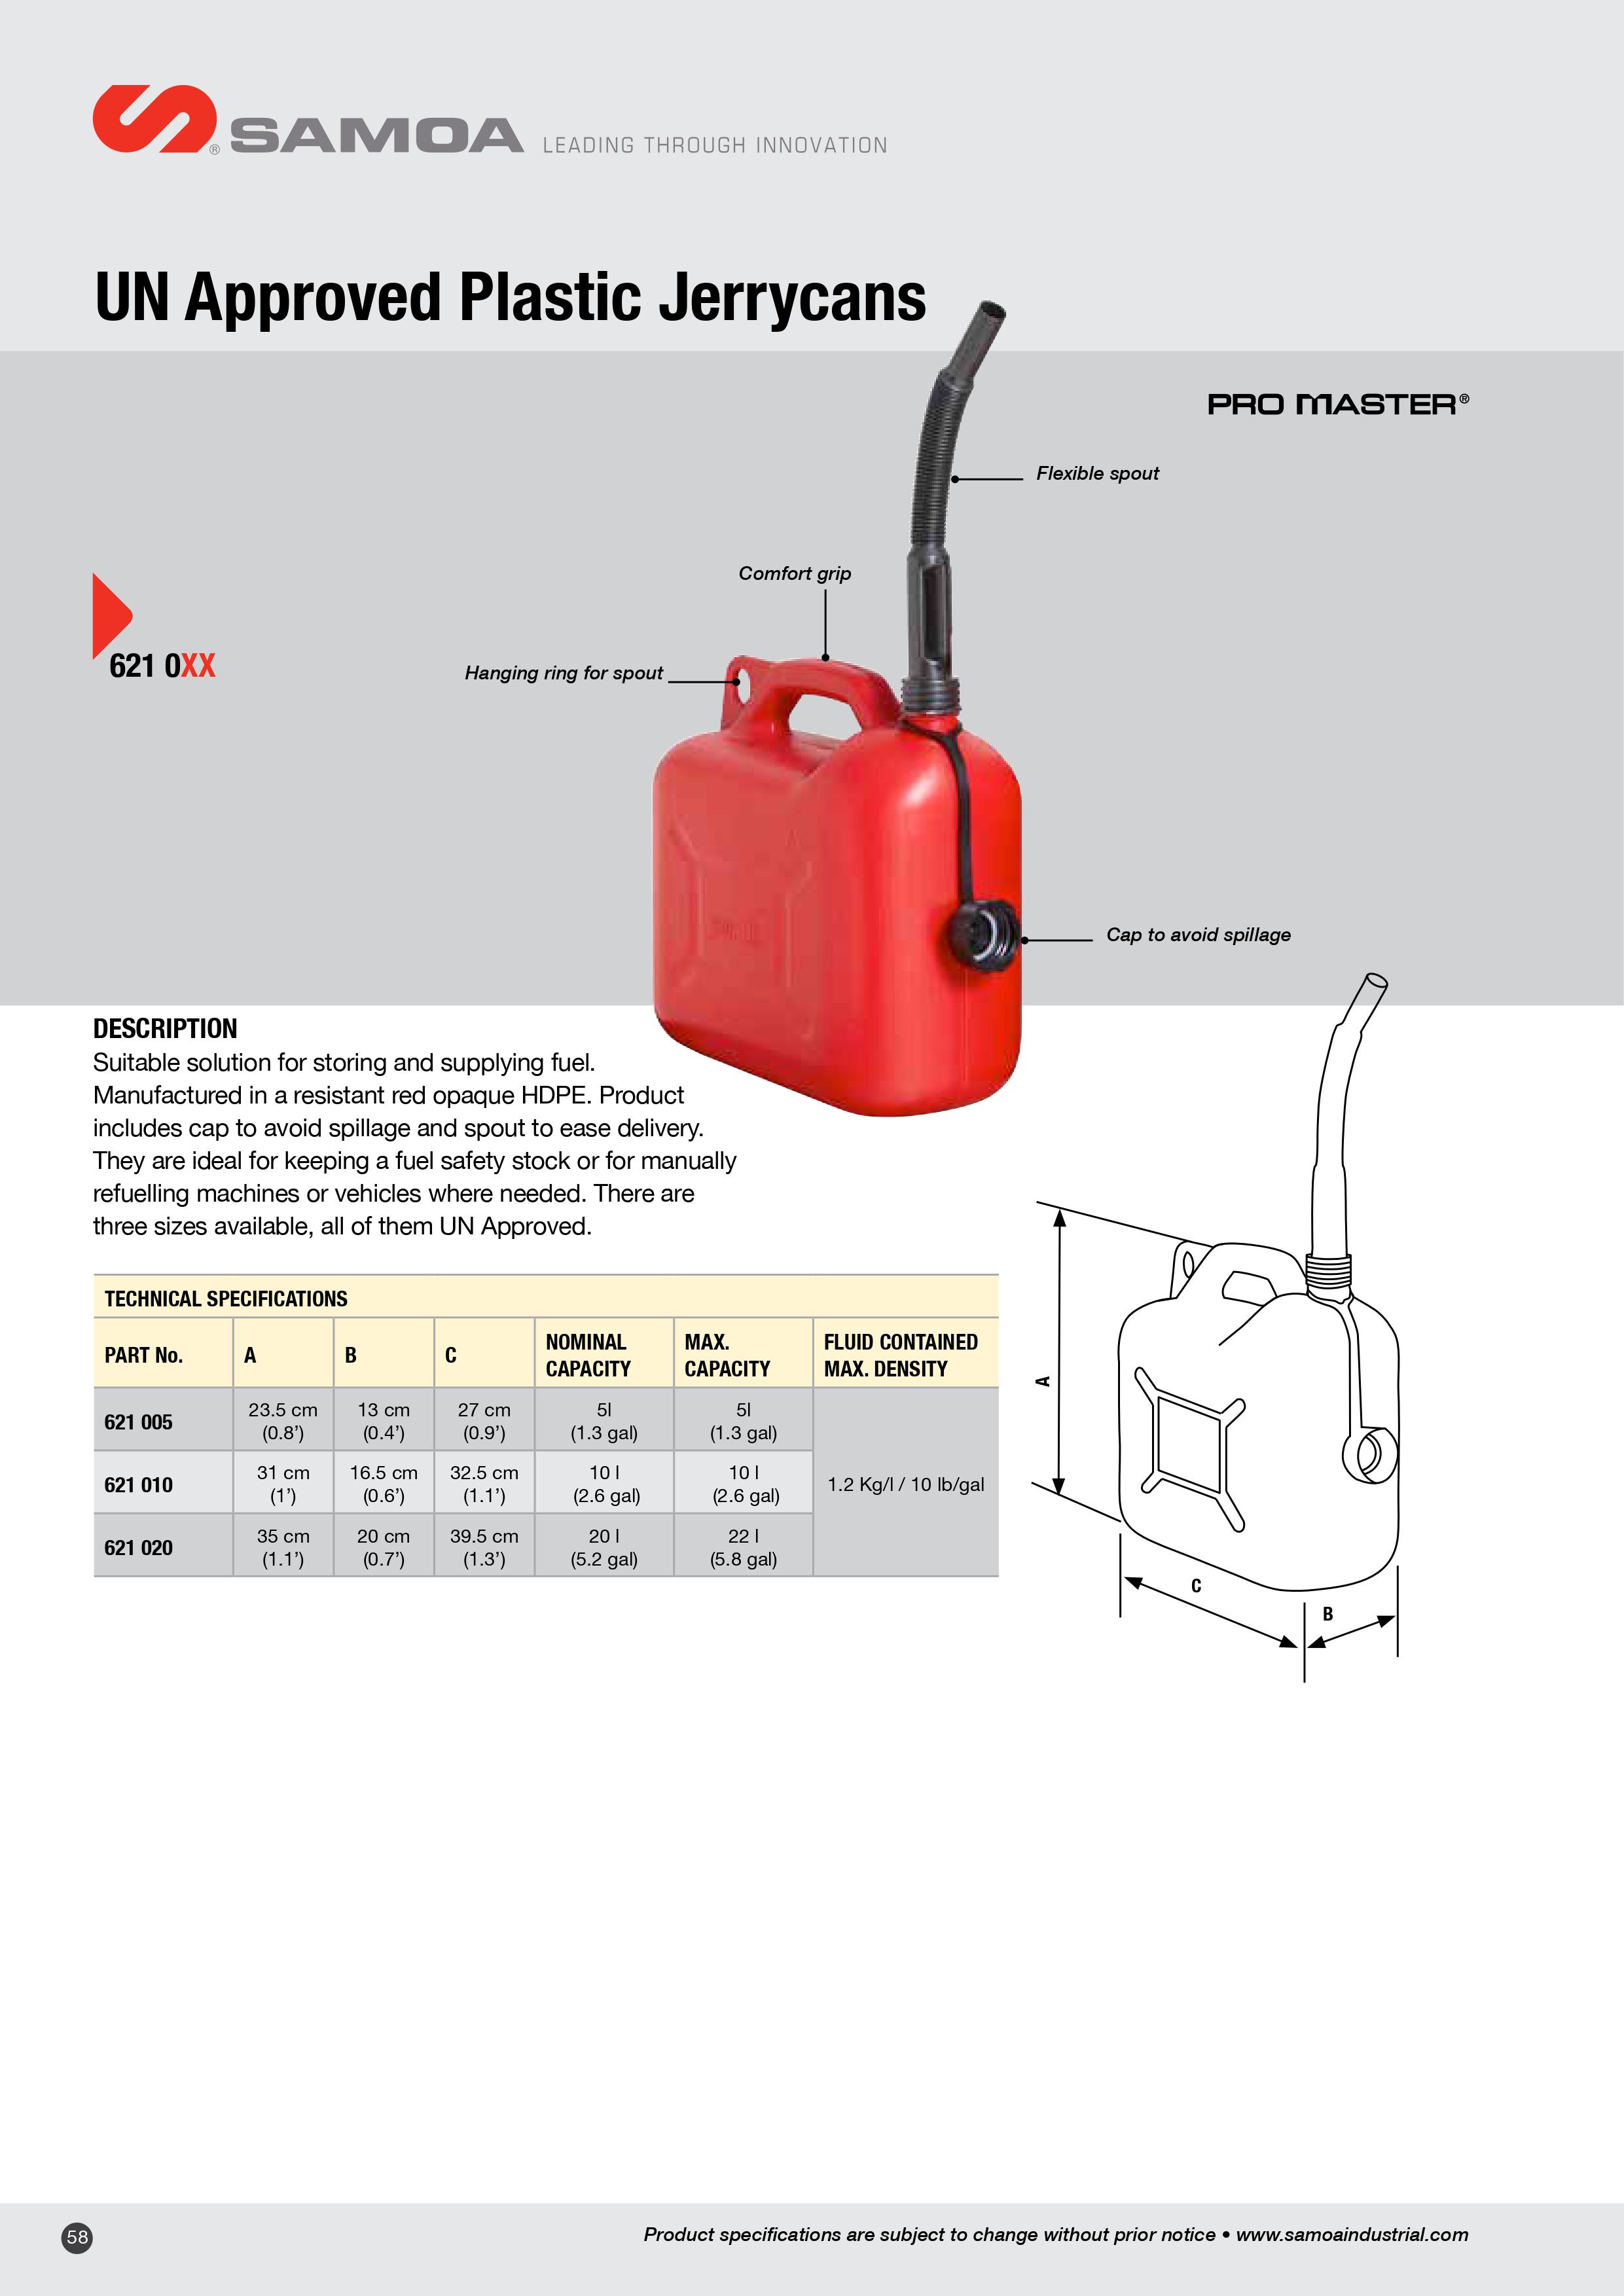 6210XX Red Plastic Fuel Cans